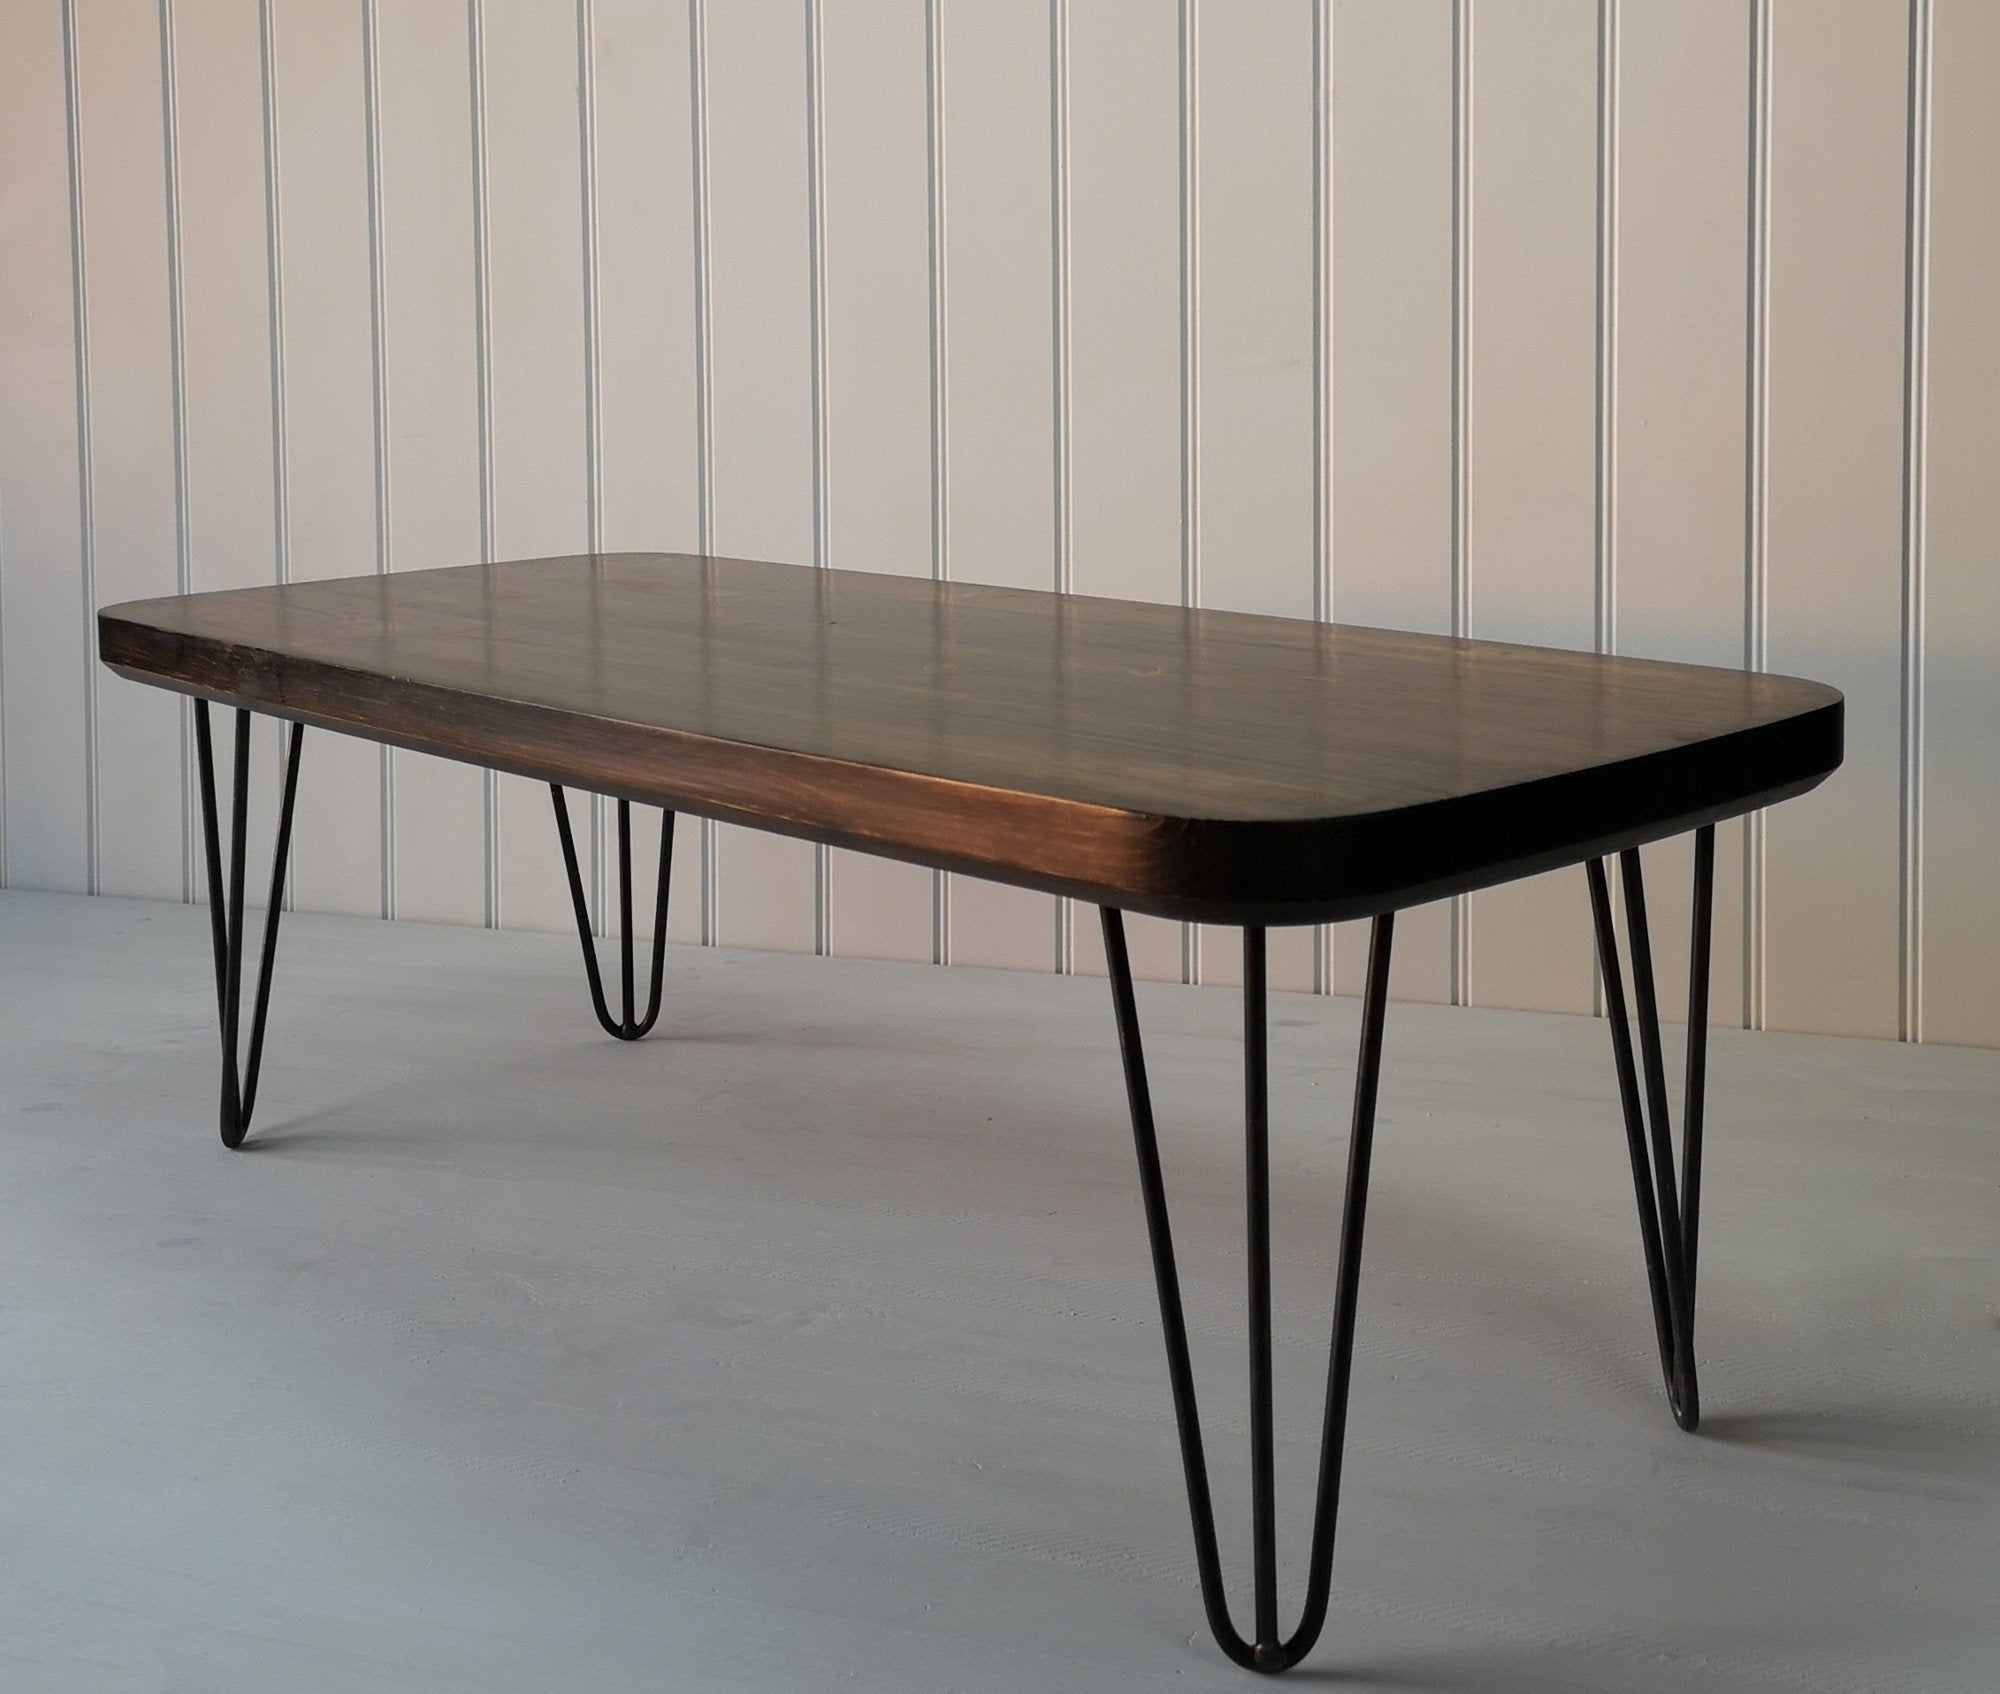 Dark wood finished  rectangular coffee table with curved edges and hair pin legs